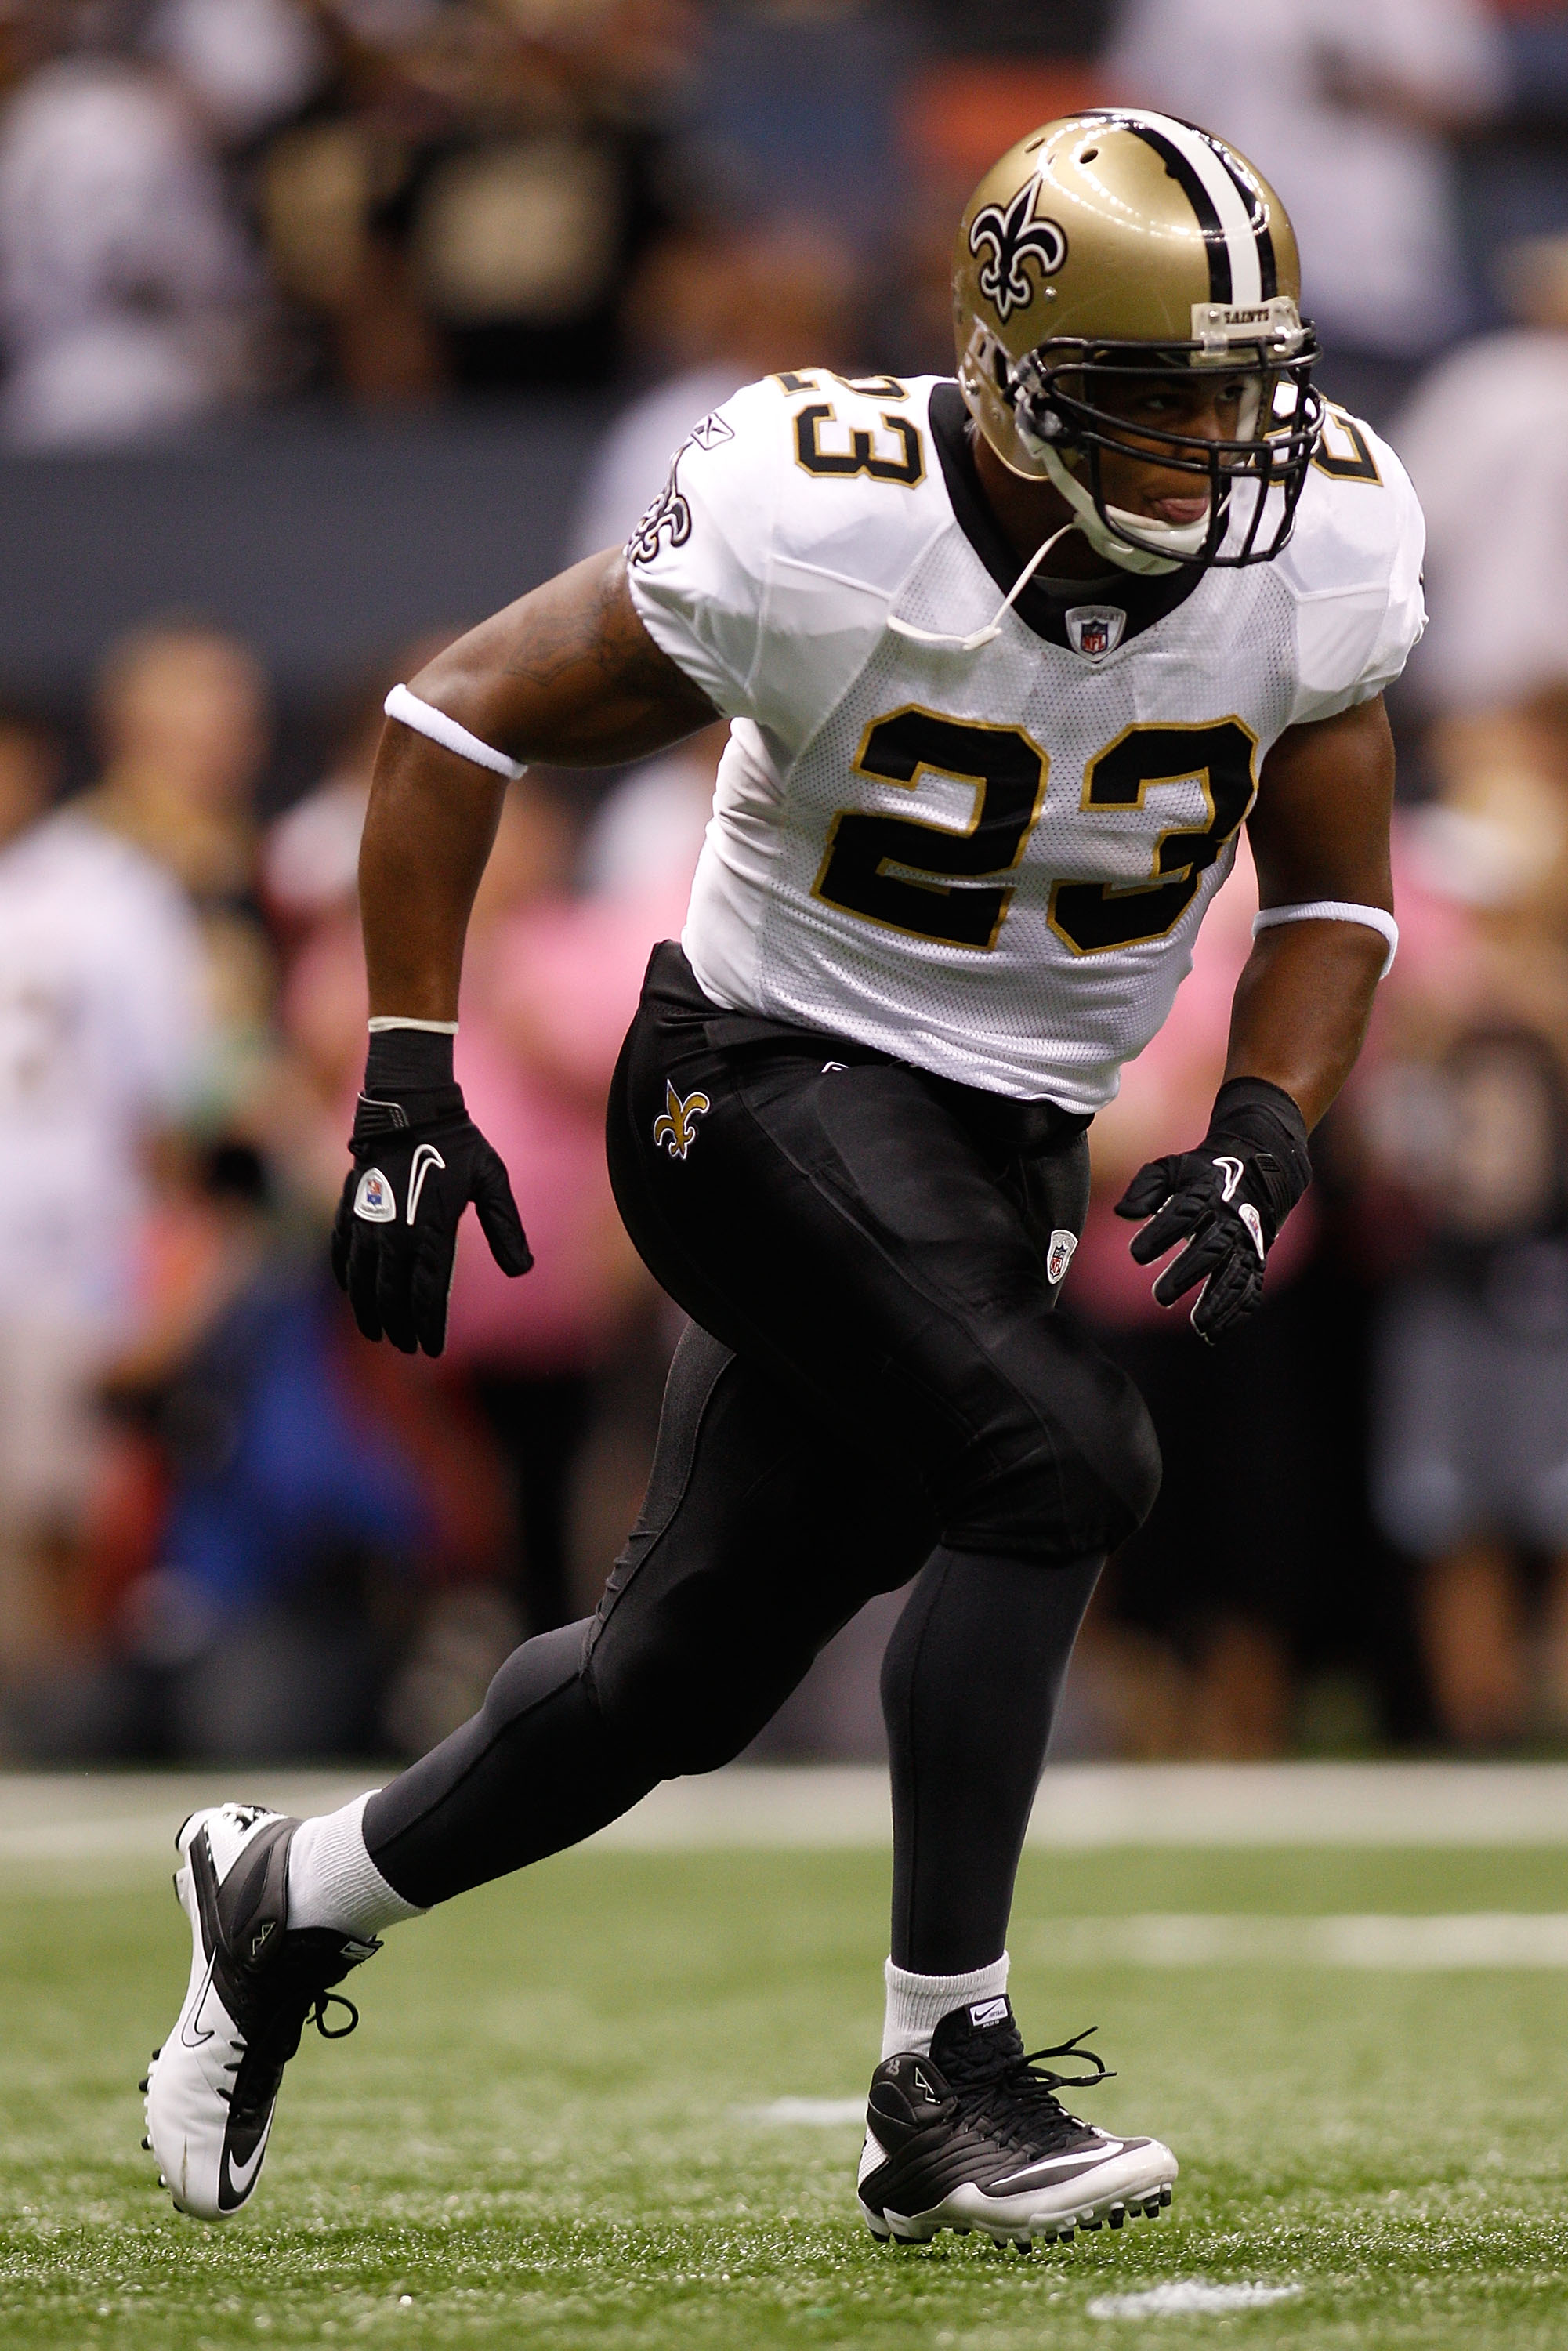 NEW ORLEANS - SEPTEMBER 26:  Pierre Thomas #23 of the New Orleans Saints in action during the game against the Atlanta Falcons at the Louisiana Superdome on September 26, 2010 in New Orleans, Louisiana.  (Photo by Chris Graythen/Getty Images)